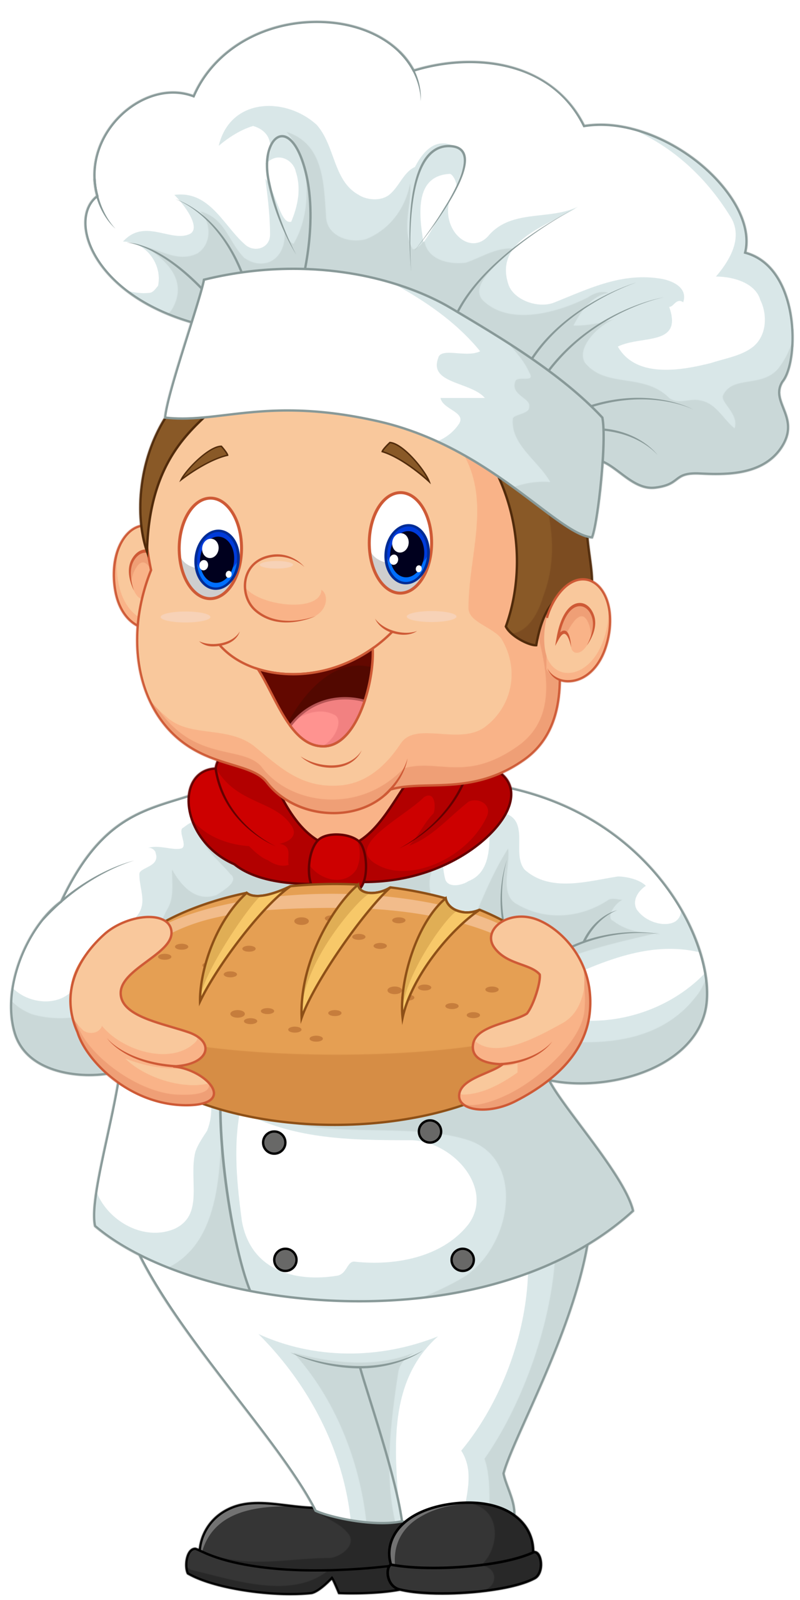 Chef Free PNG Image